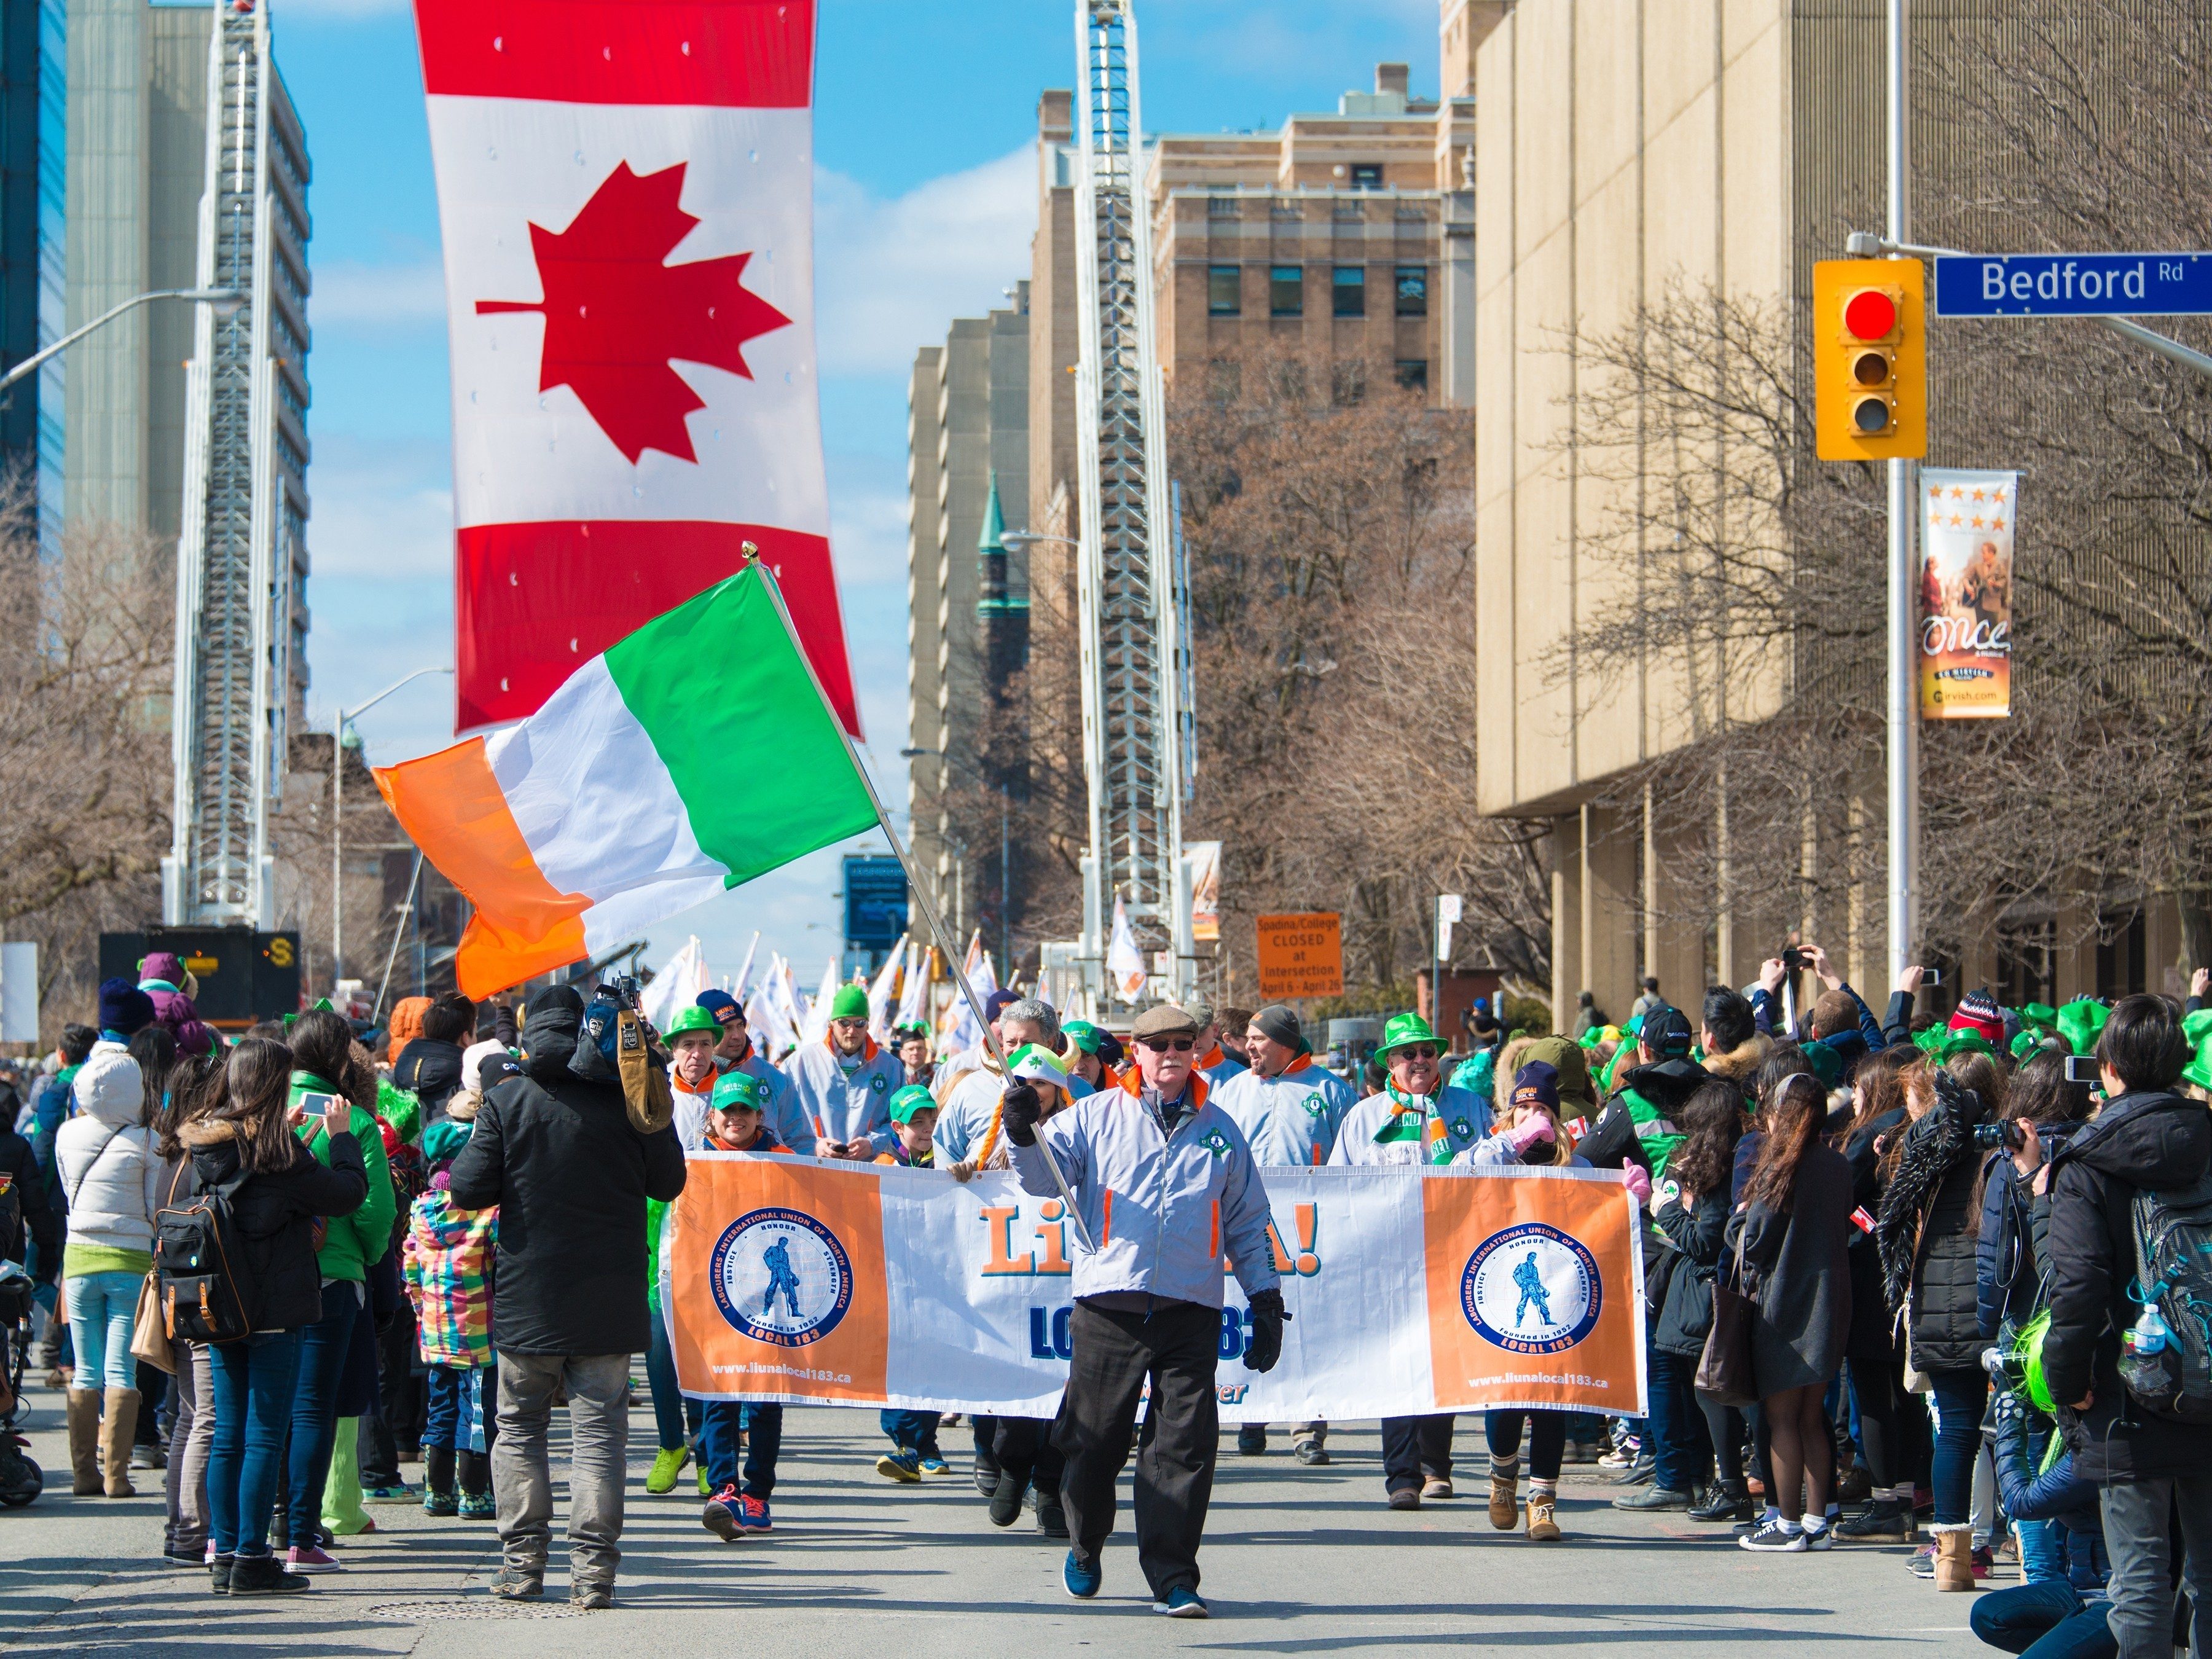 The 10 biggest ST. PATRICK'S DAY parades around the world